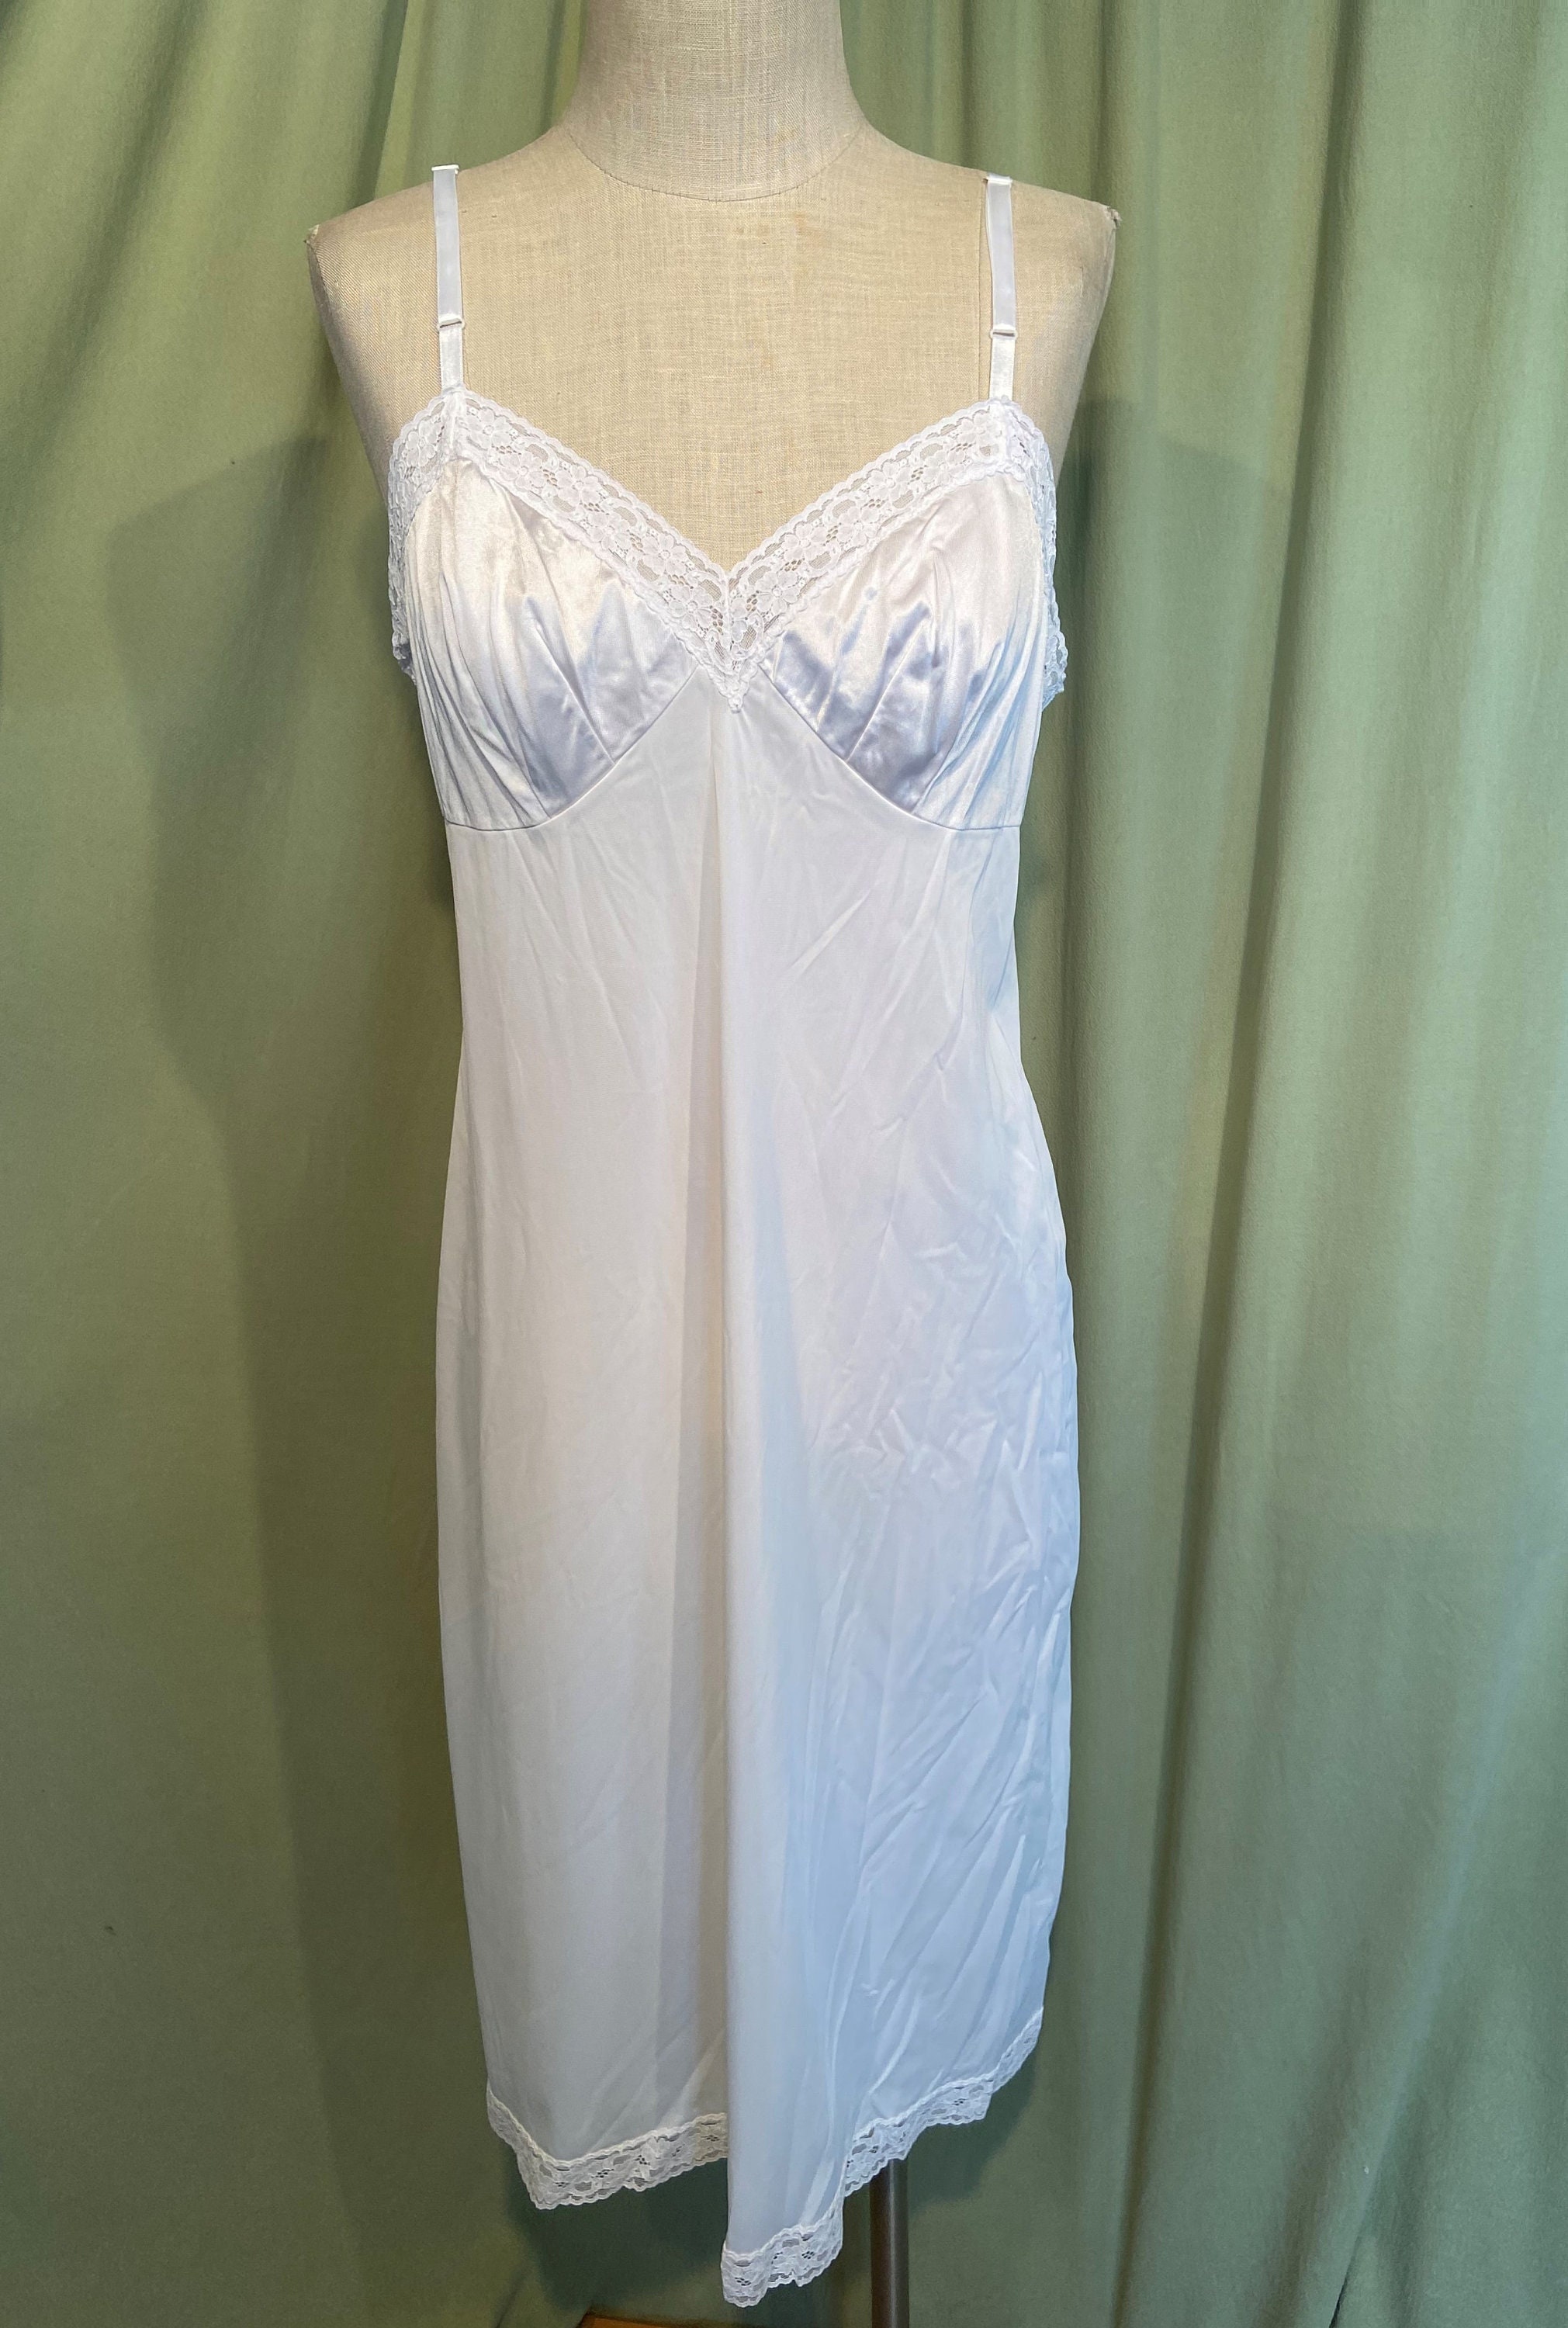 VANITY FAIR Long Slip Nightgown - Size 34 32/40 Off White/ Beige - Made  USA